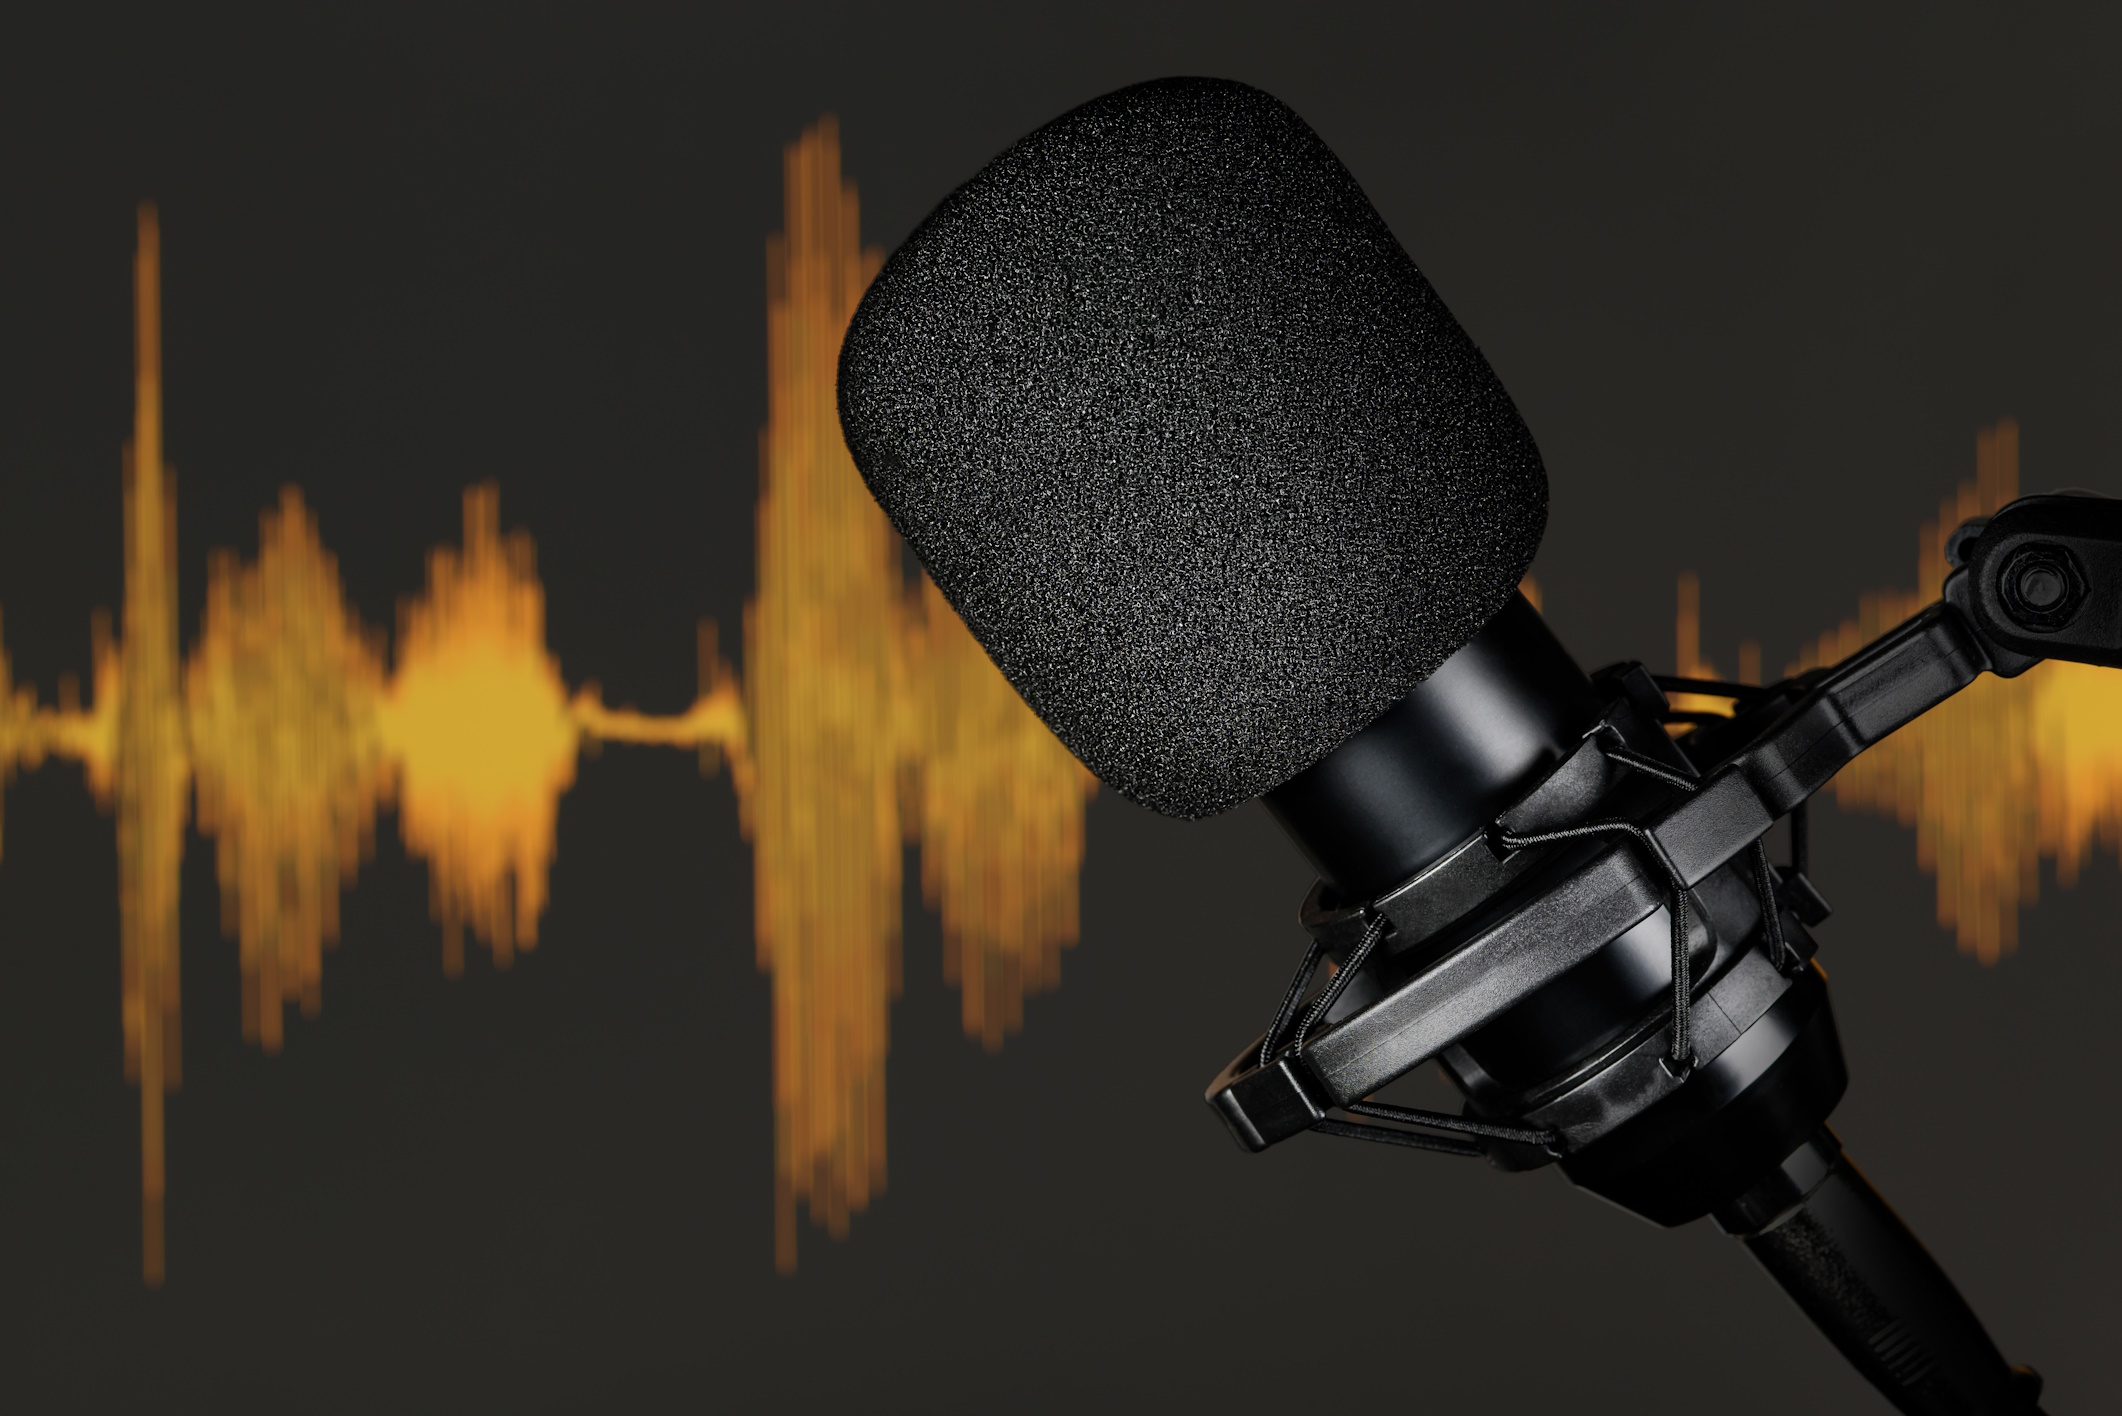 Close-up of a professional studio microphone against an orange audio waveform background, symbolizing the technical craft of podcast engagement strategies.